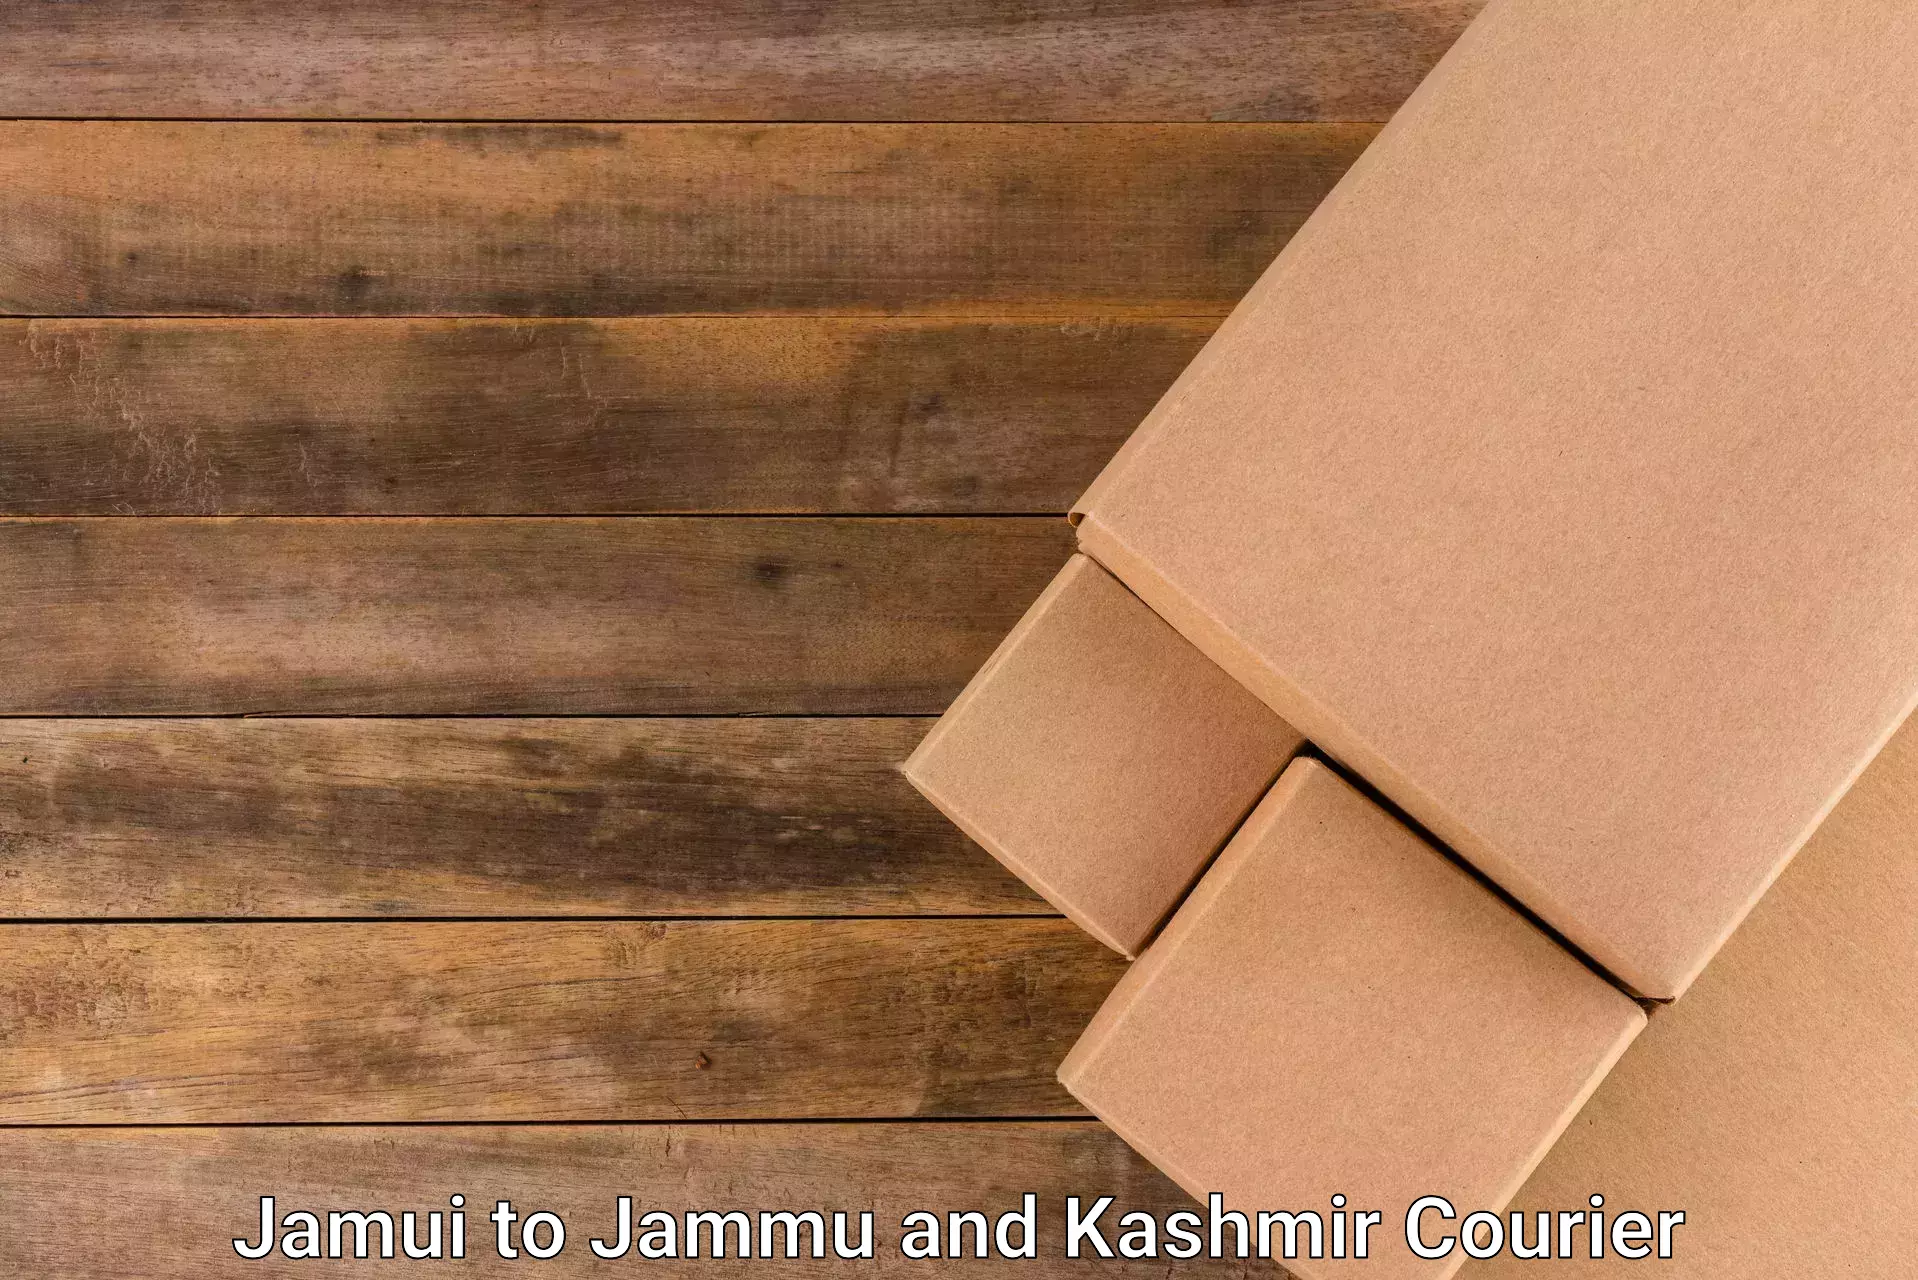 Nationwide courier service Jamui to Jakh